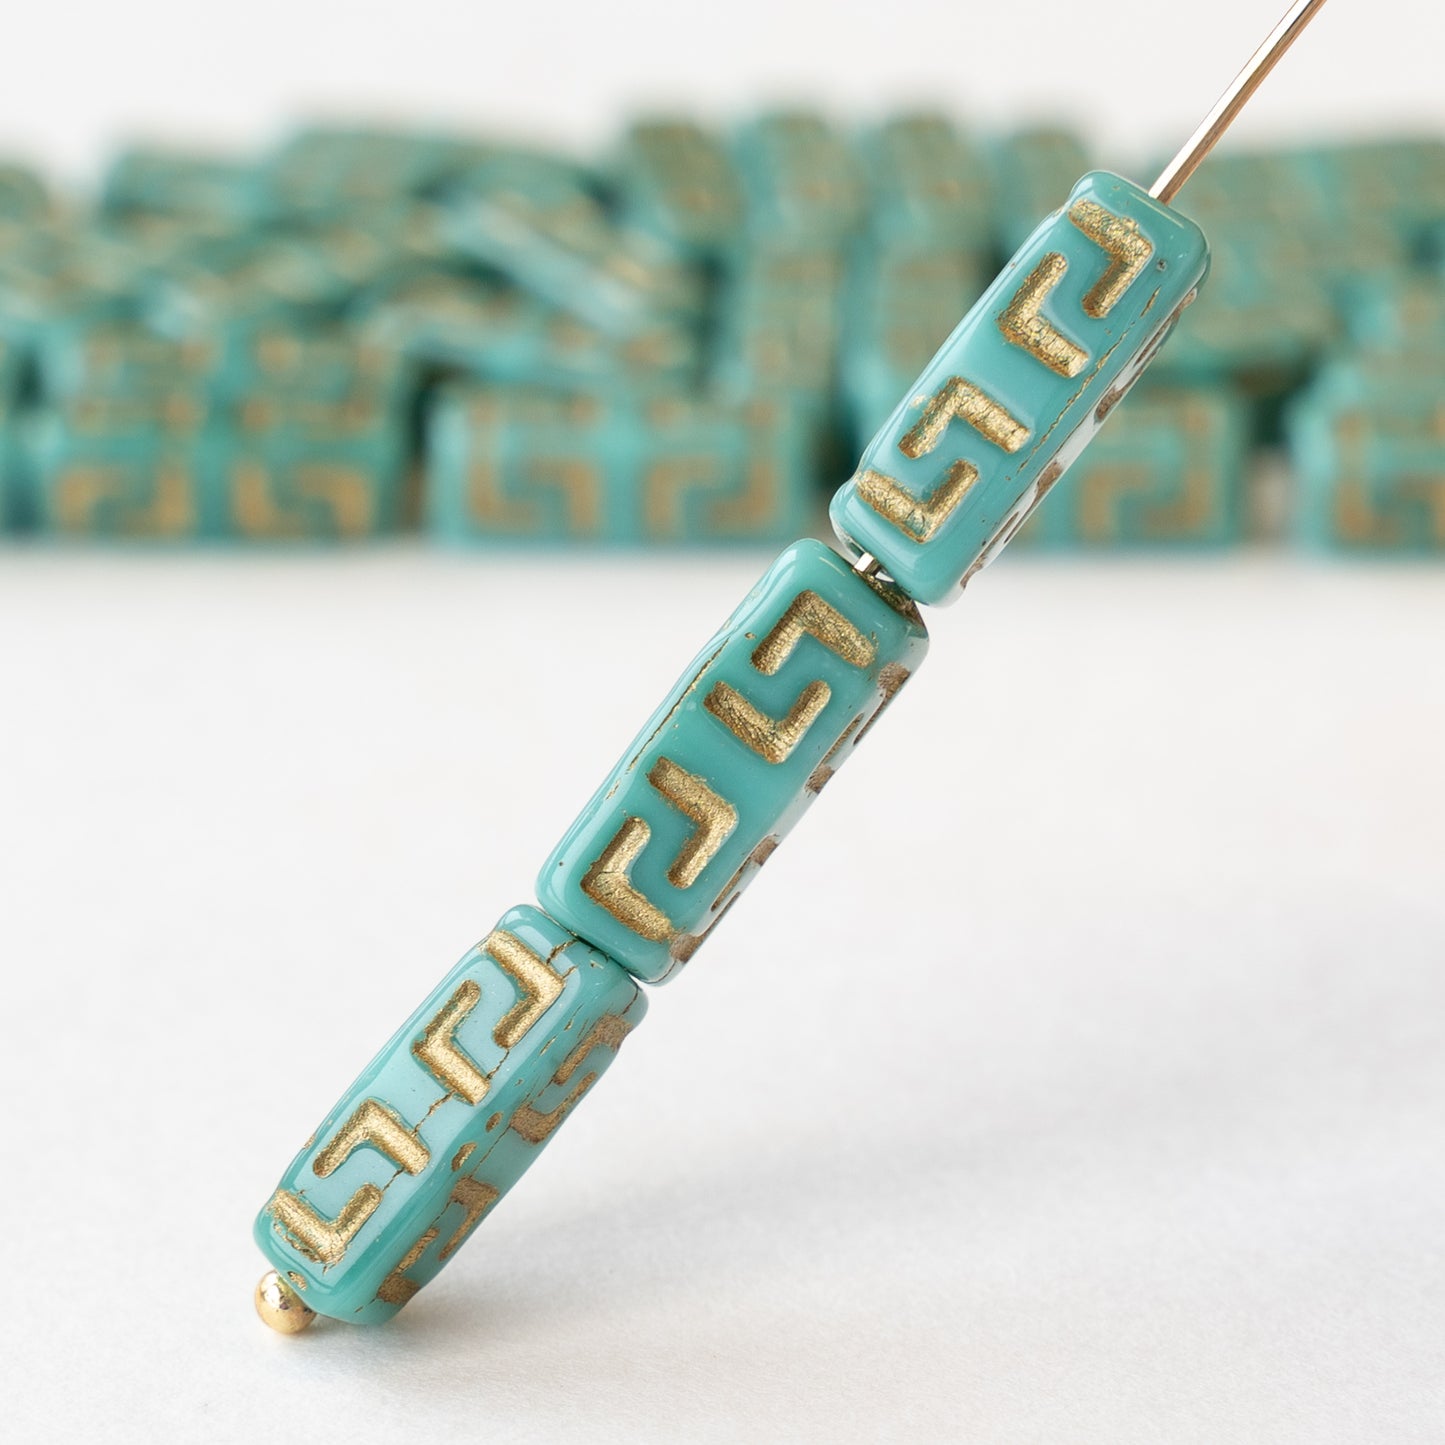 15mm Rectangle Celtic Block Beads - Turquoise with Gold Wash - 10 Beads